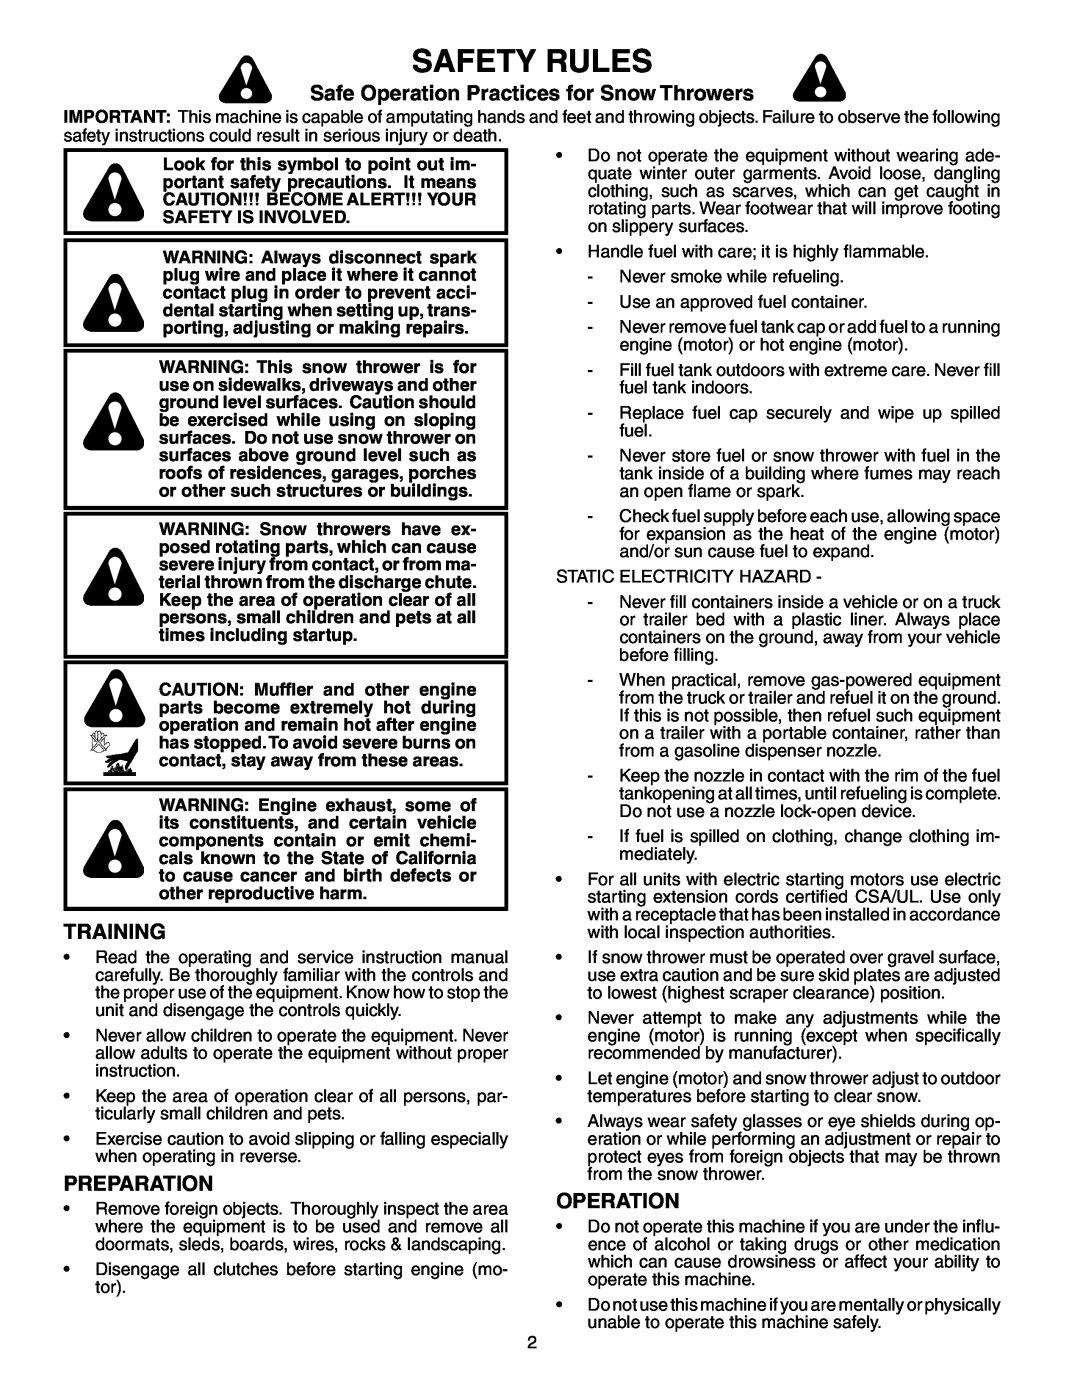 Poulan PP1130ESC owner manual Safety Rules, Safe Operation Practices for Snow Throwers, Training, Preparation 